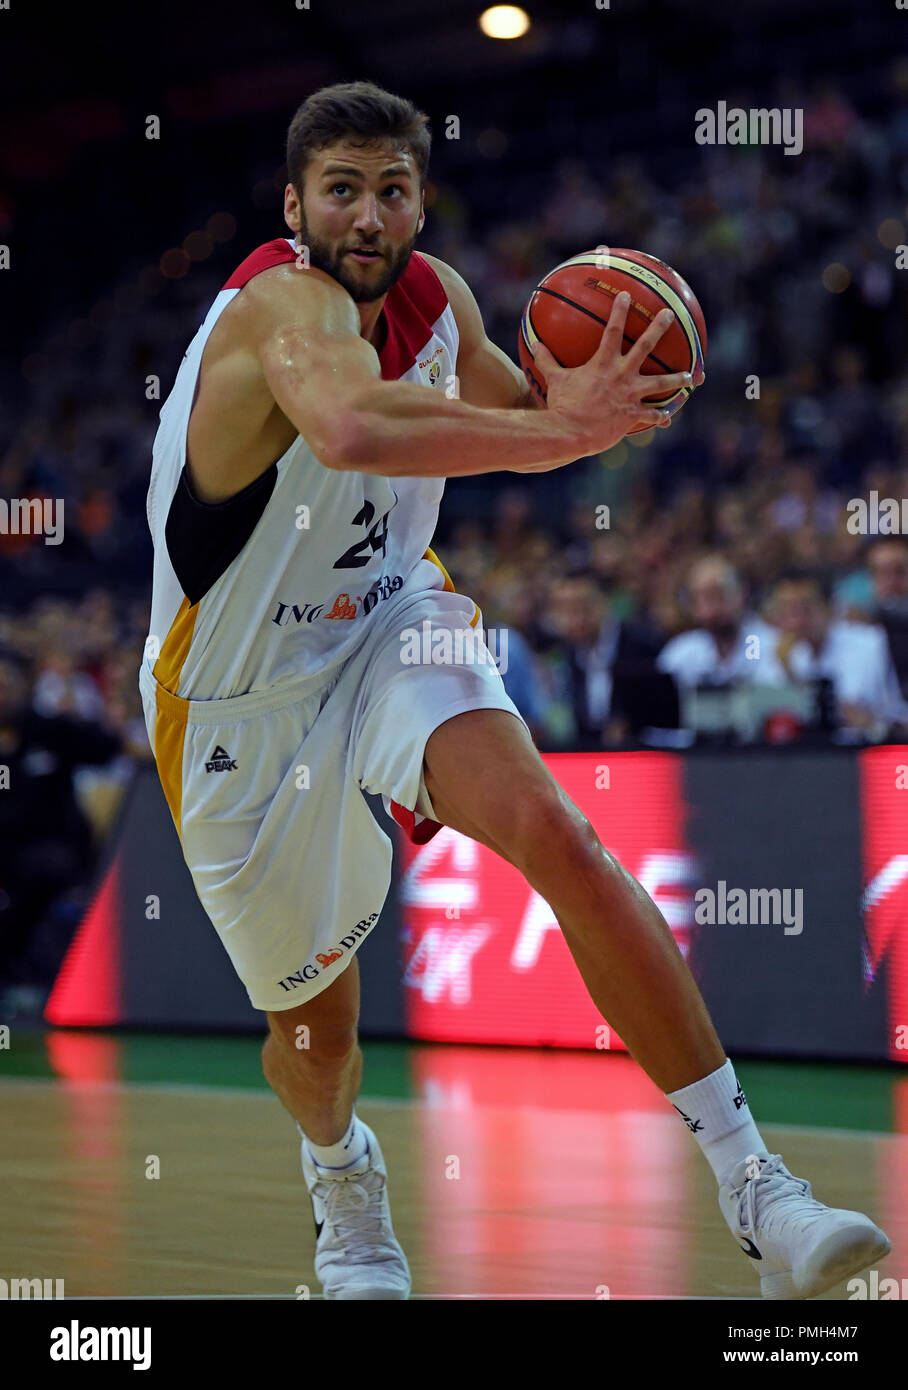 Leipzig, Saxony. 16th Sep, 2018. Basketball: World Cup Qualification,  Germany - Israel, Round 2, Group L, Day 2 at the Arena Leipzig. Germany's  Robin Benzing in action. Credit: Hendrik  Schmidt/dpa-Zentralbild/ZB/dpa/Alamy Live News